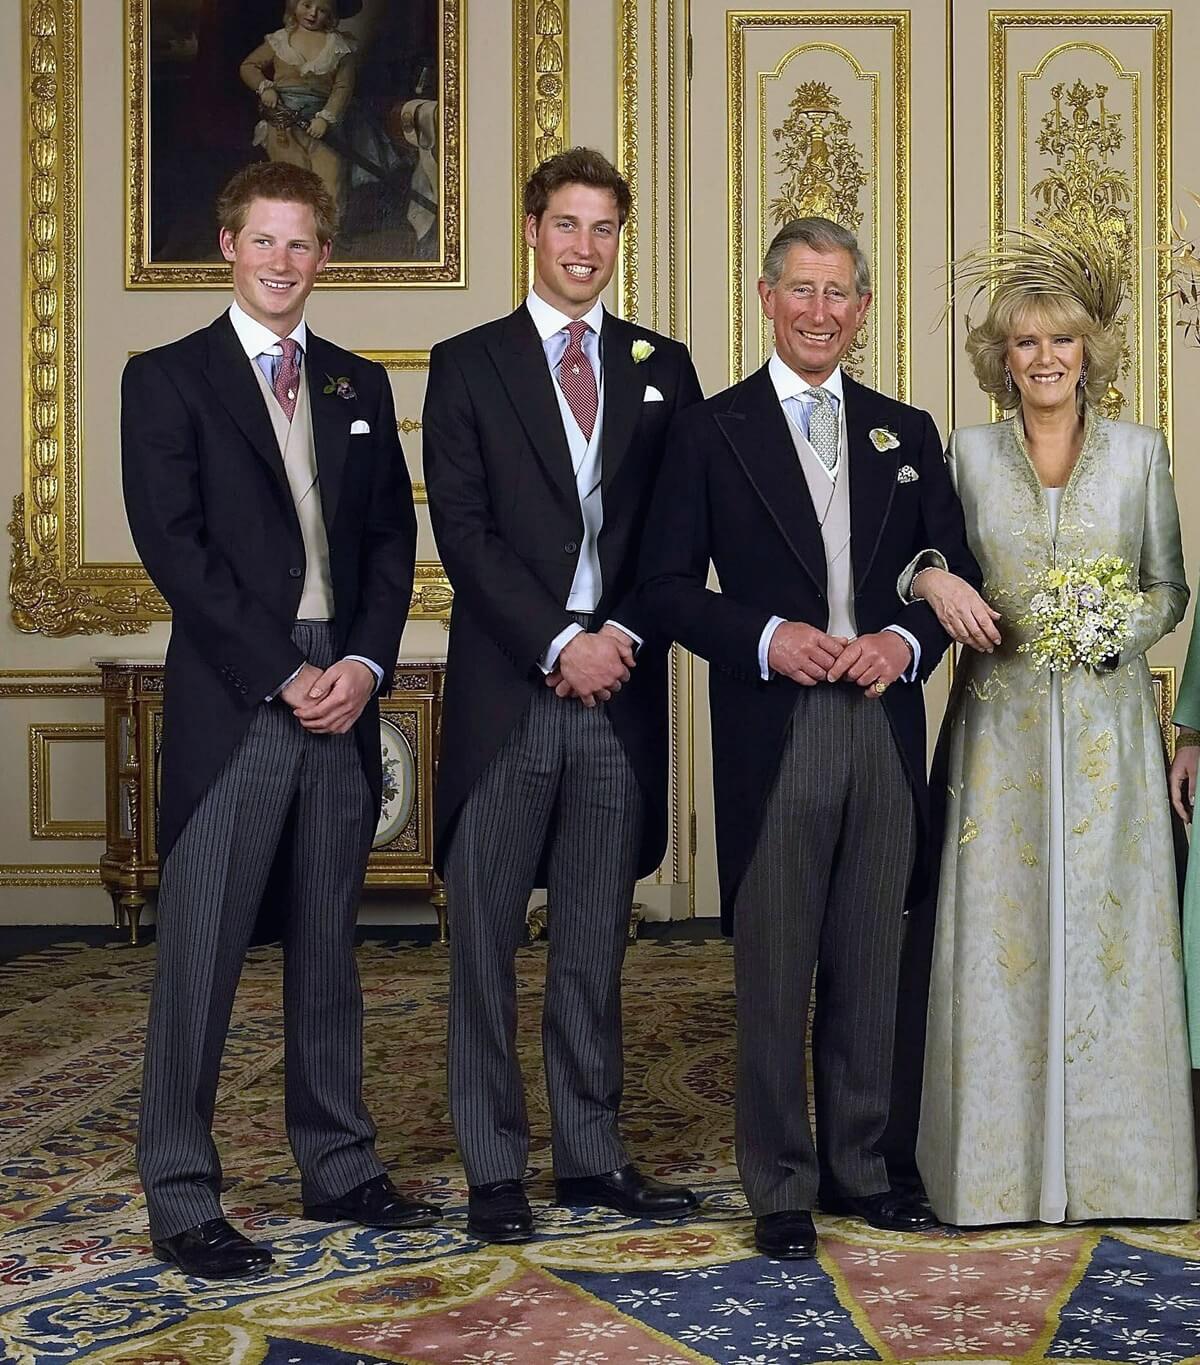 Video Shows Prince William's Mixed Emotions During His Father's Wedding ...